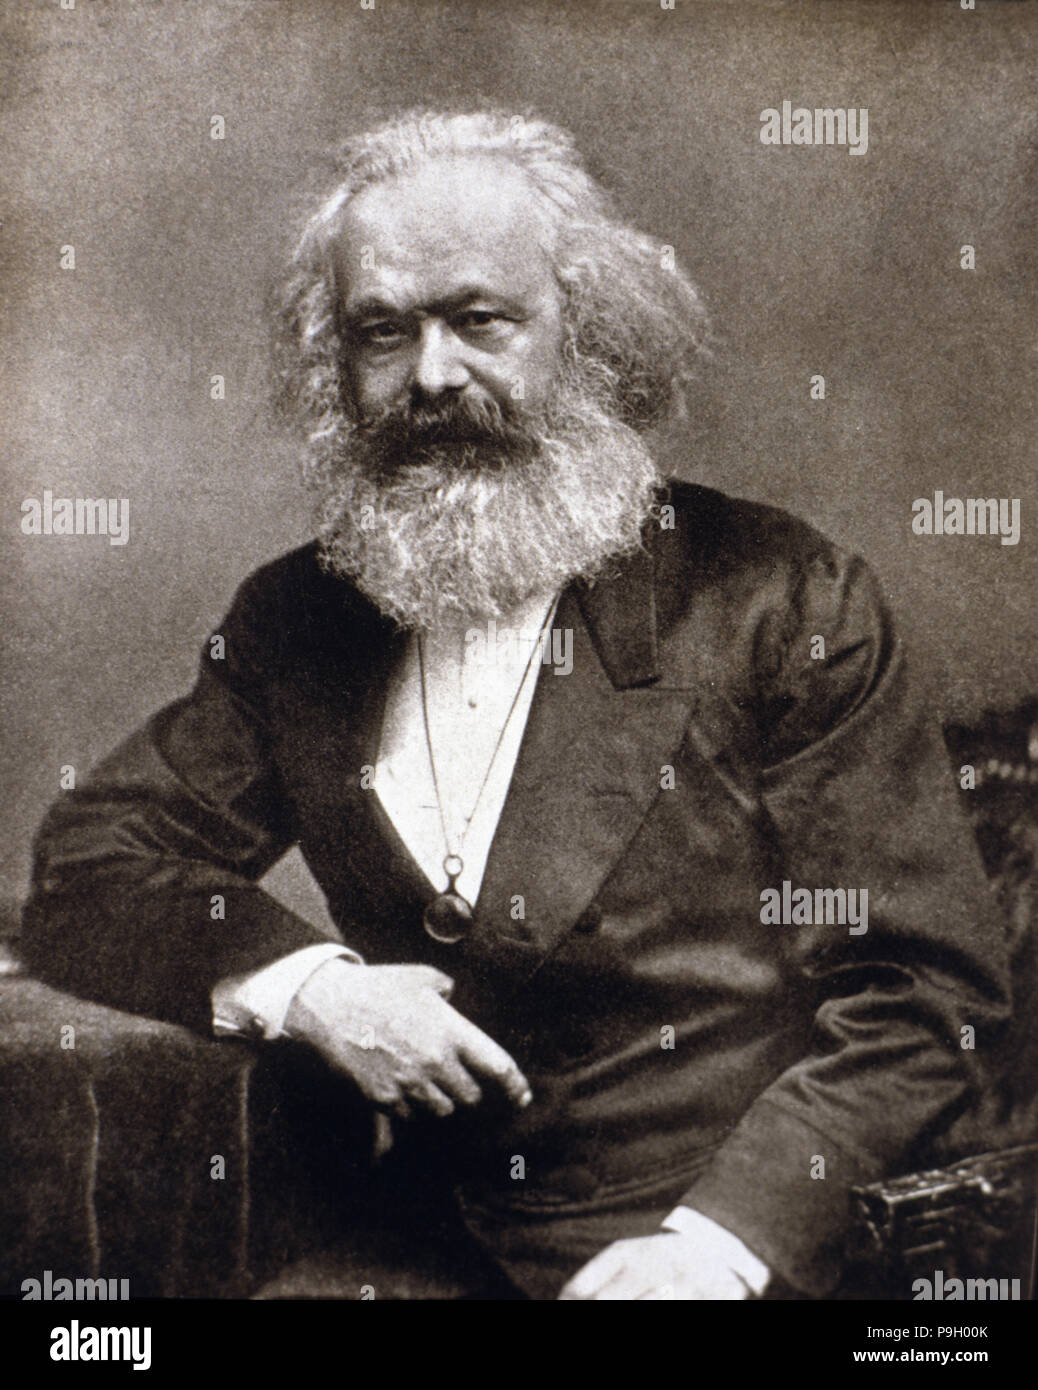 Carl Marx (1818-1883), German sociologist, philosopher and founder of the doctrine of Marxism and… Stock Photo